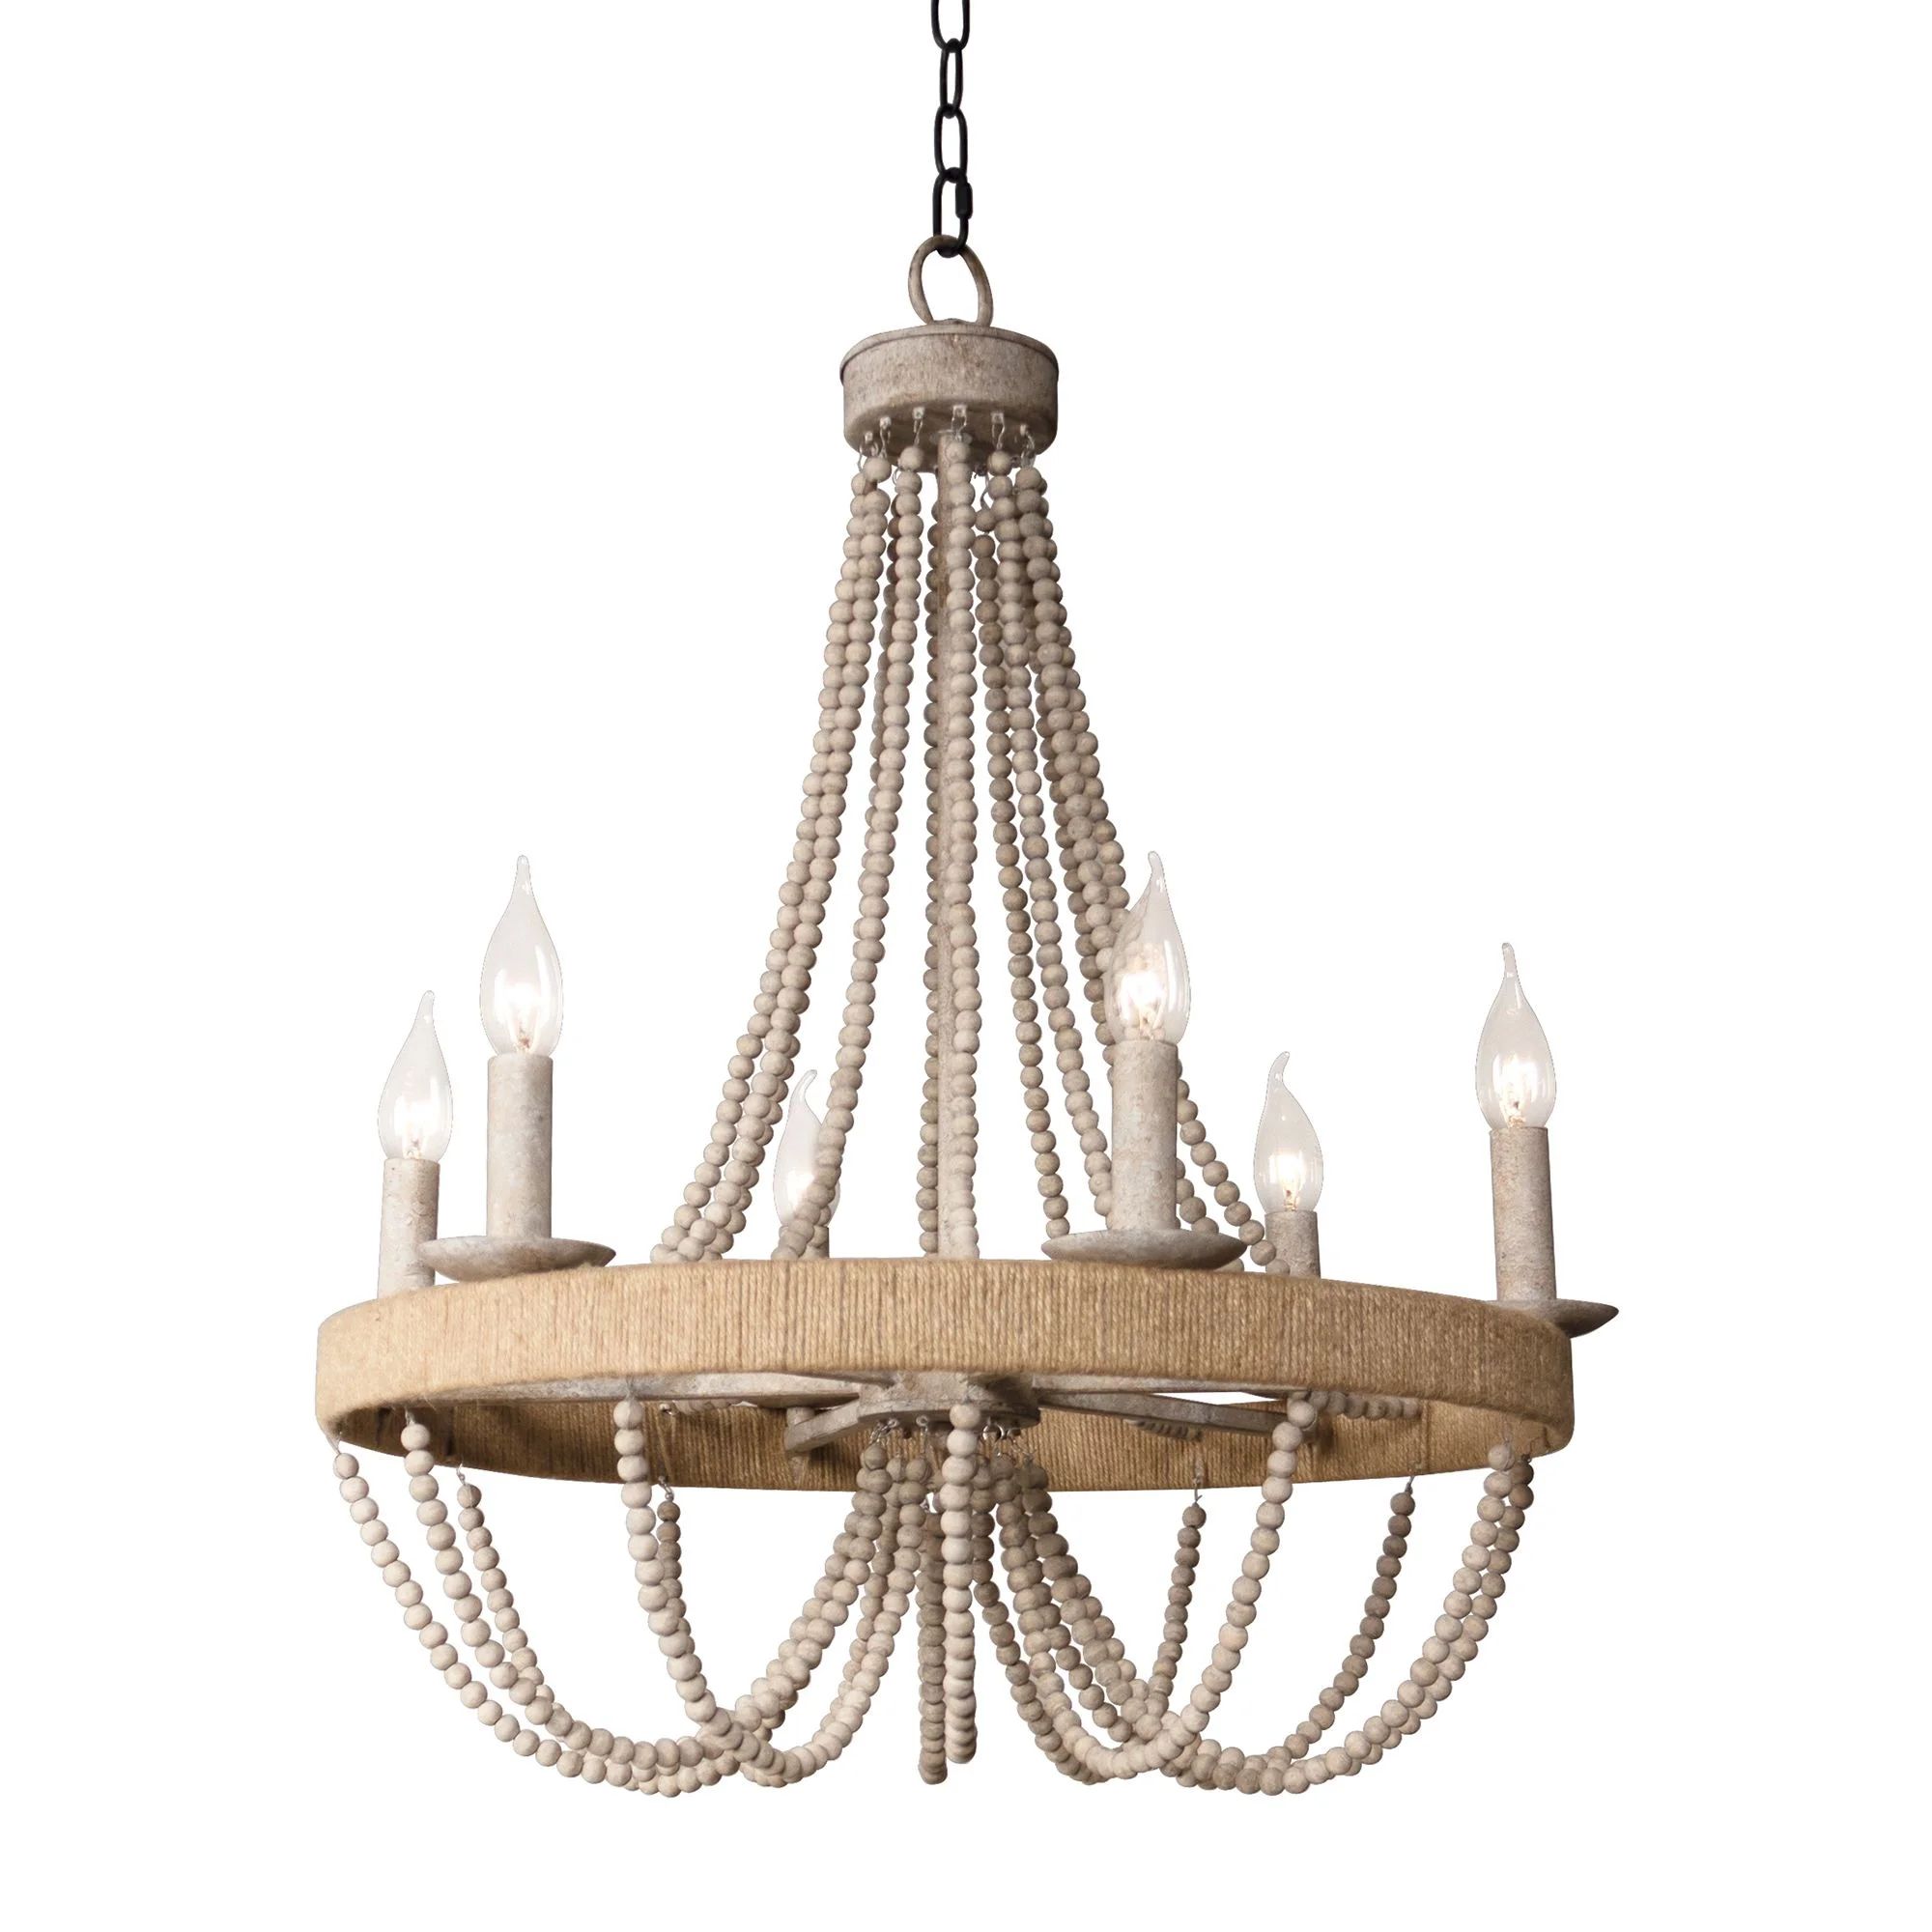 Cavitt 6 - Light Candle Style Empire Chandelier with Beaded Accents | Wayfair North America